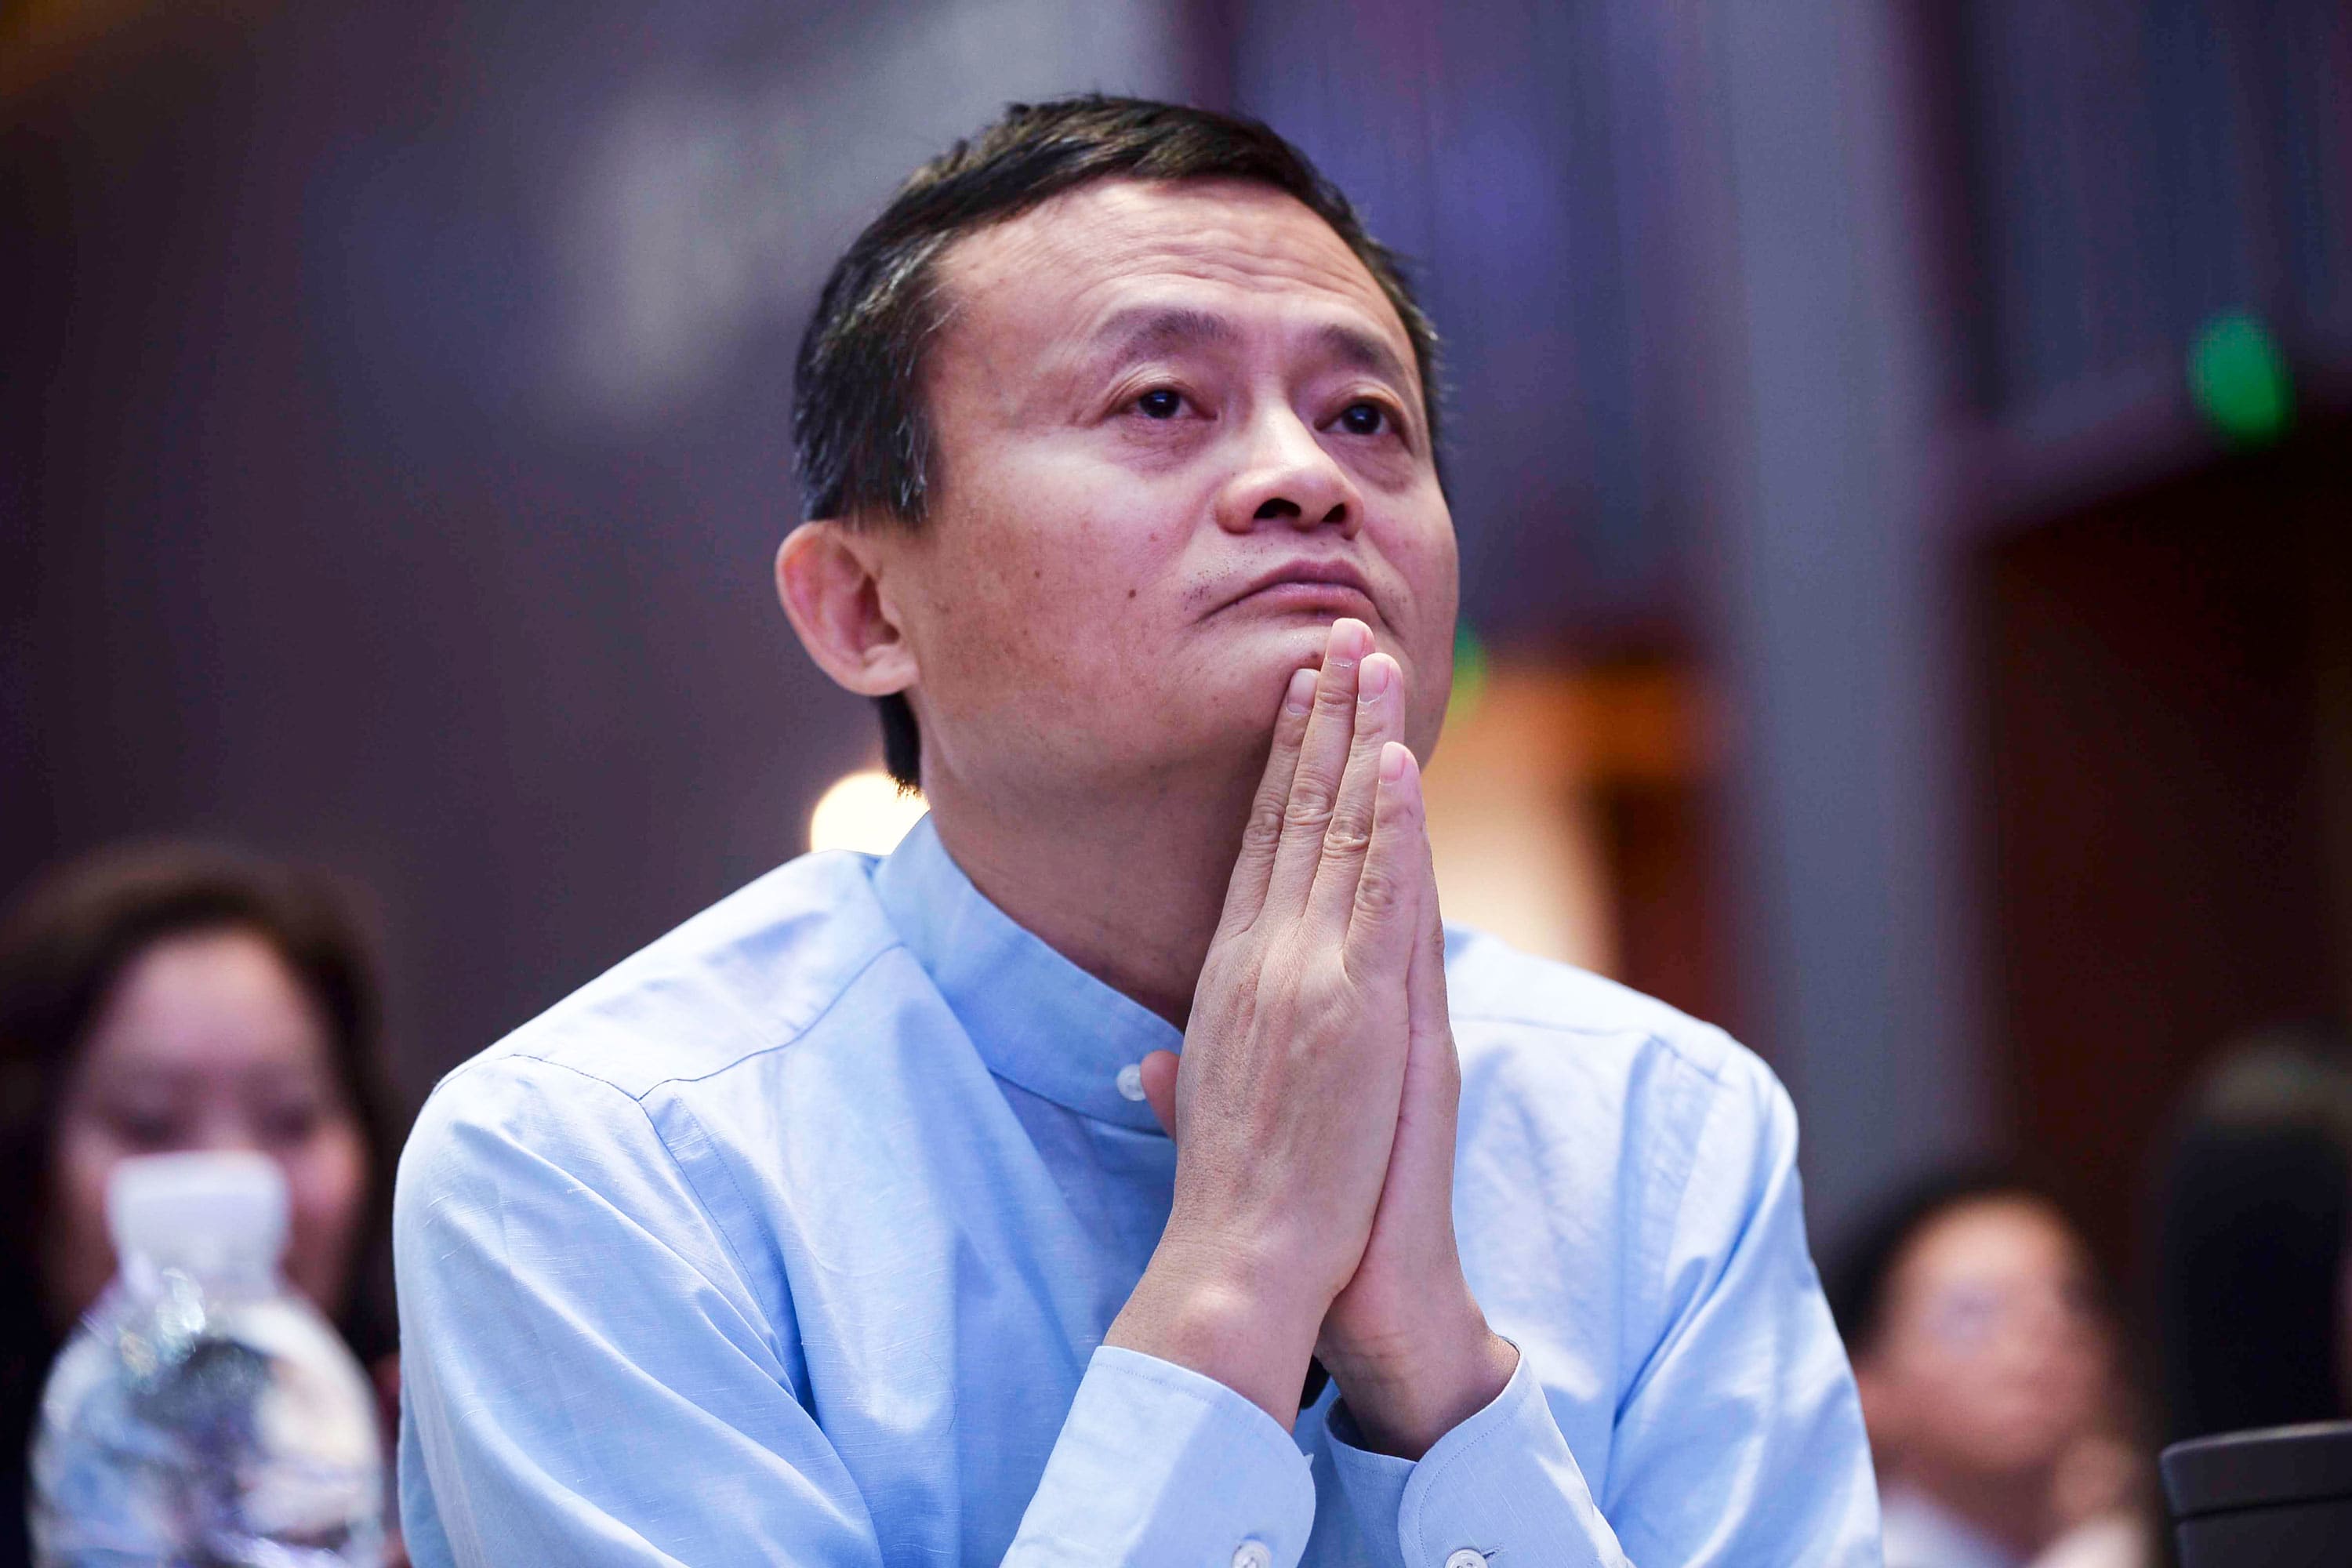 Jack Ma’s missing act fuels speculation about where the billionaire is